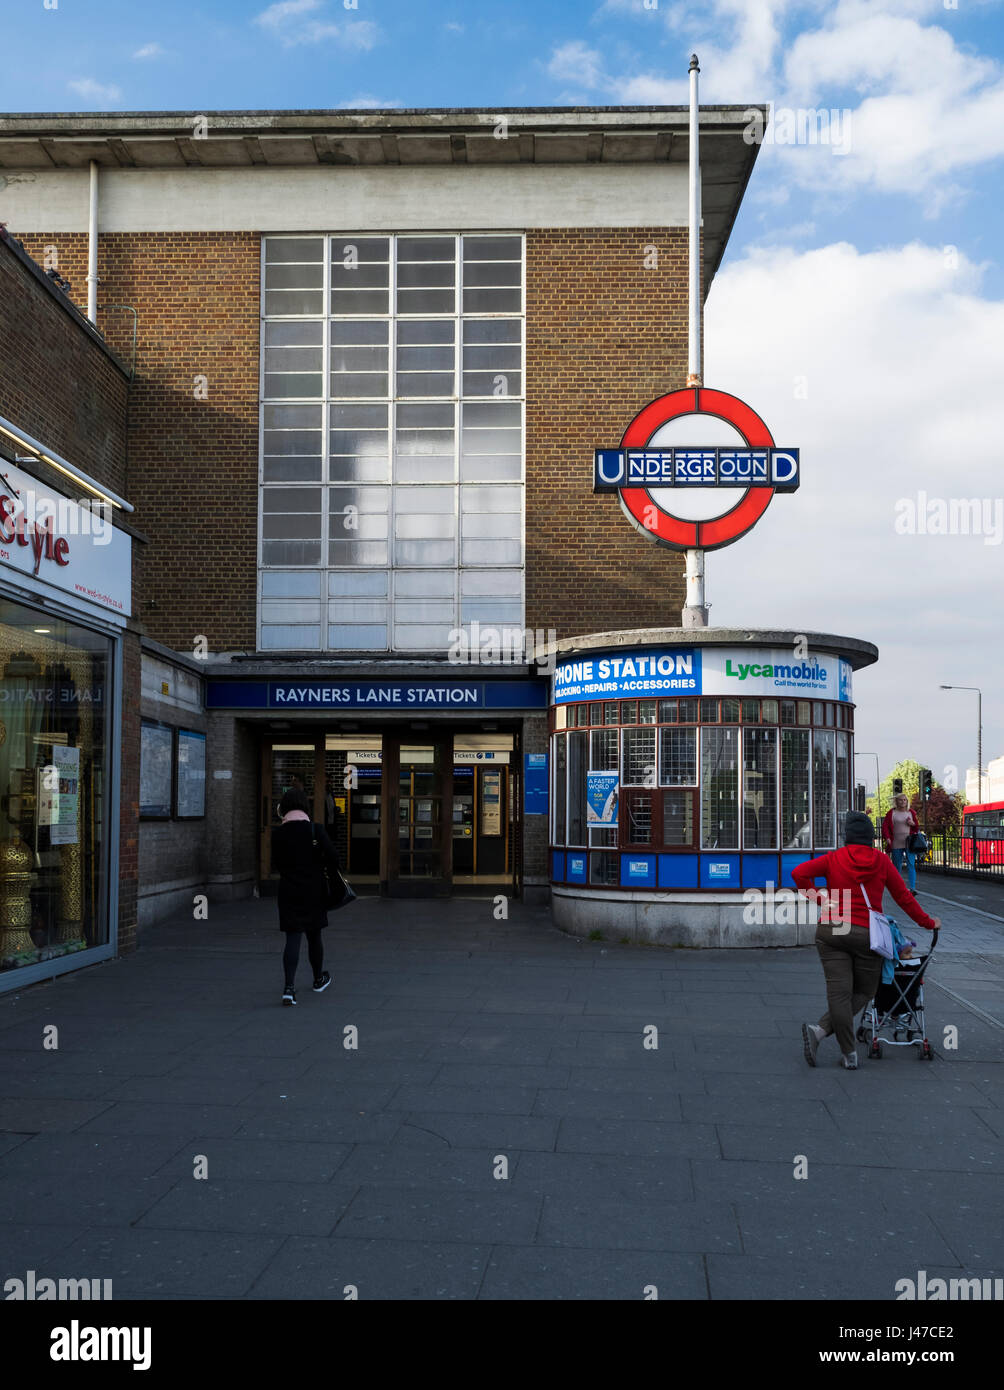 Rayners Lane station Banque D'Images